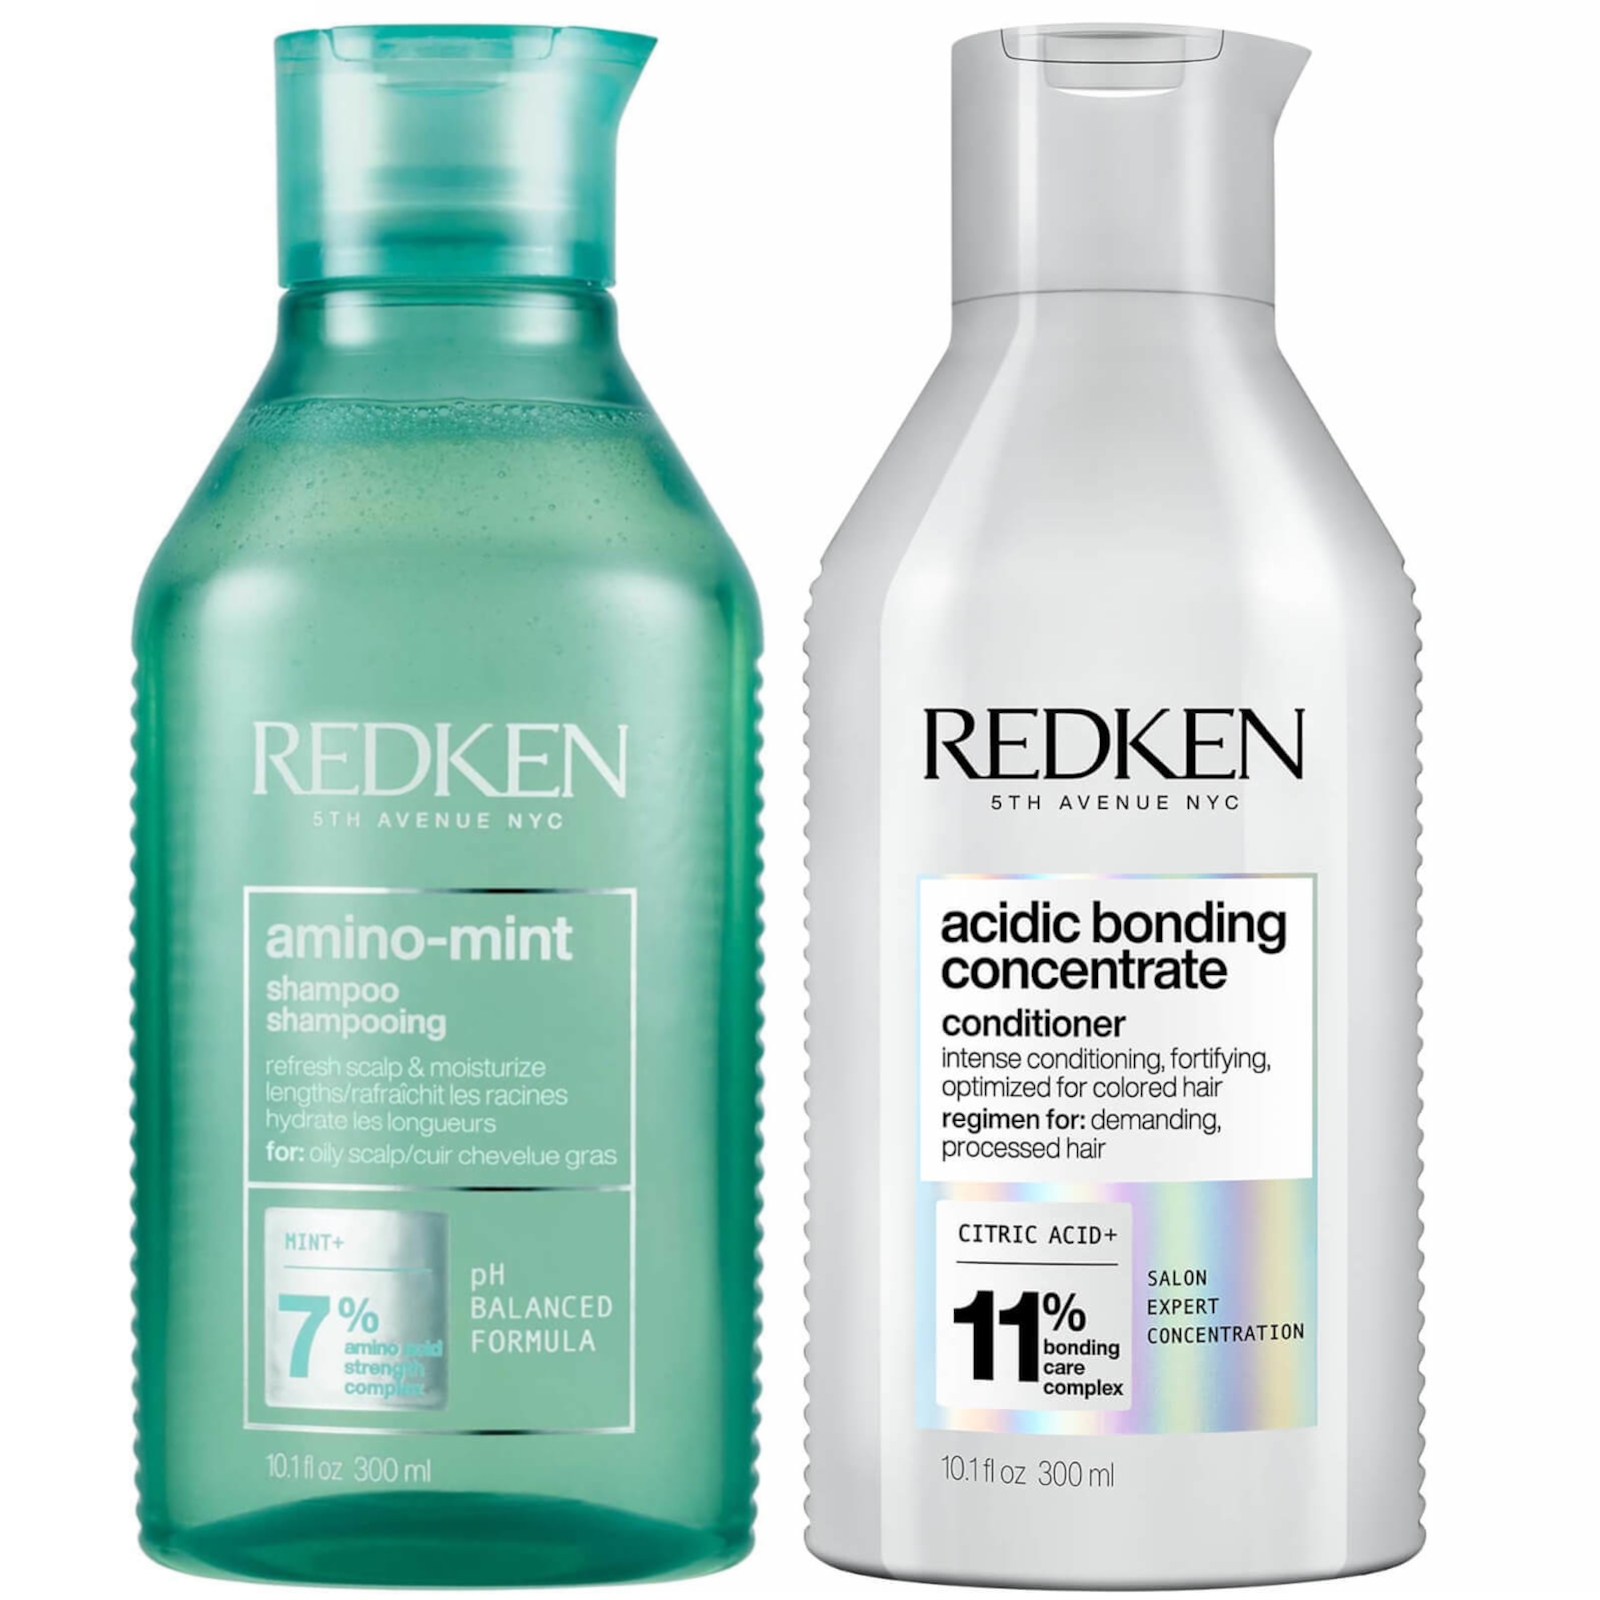 Image of Redken Amino Mint Scalp Cleansing for Greasy Hair Shampoo and Acidic Bonding Concentrate Conditioner Bundle